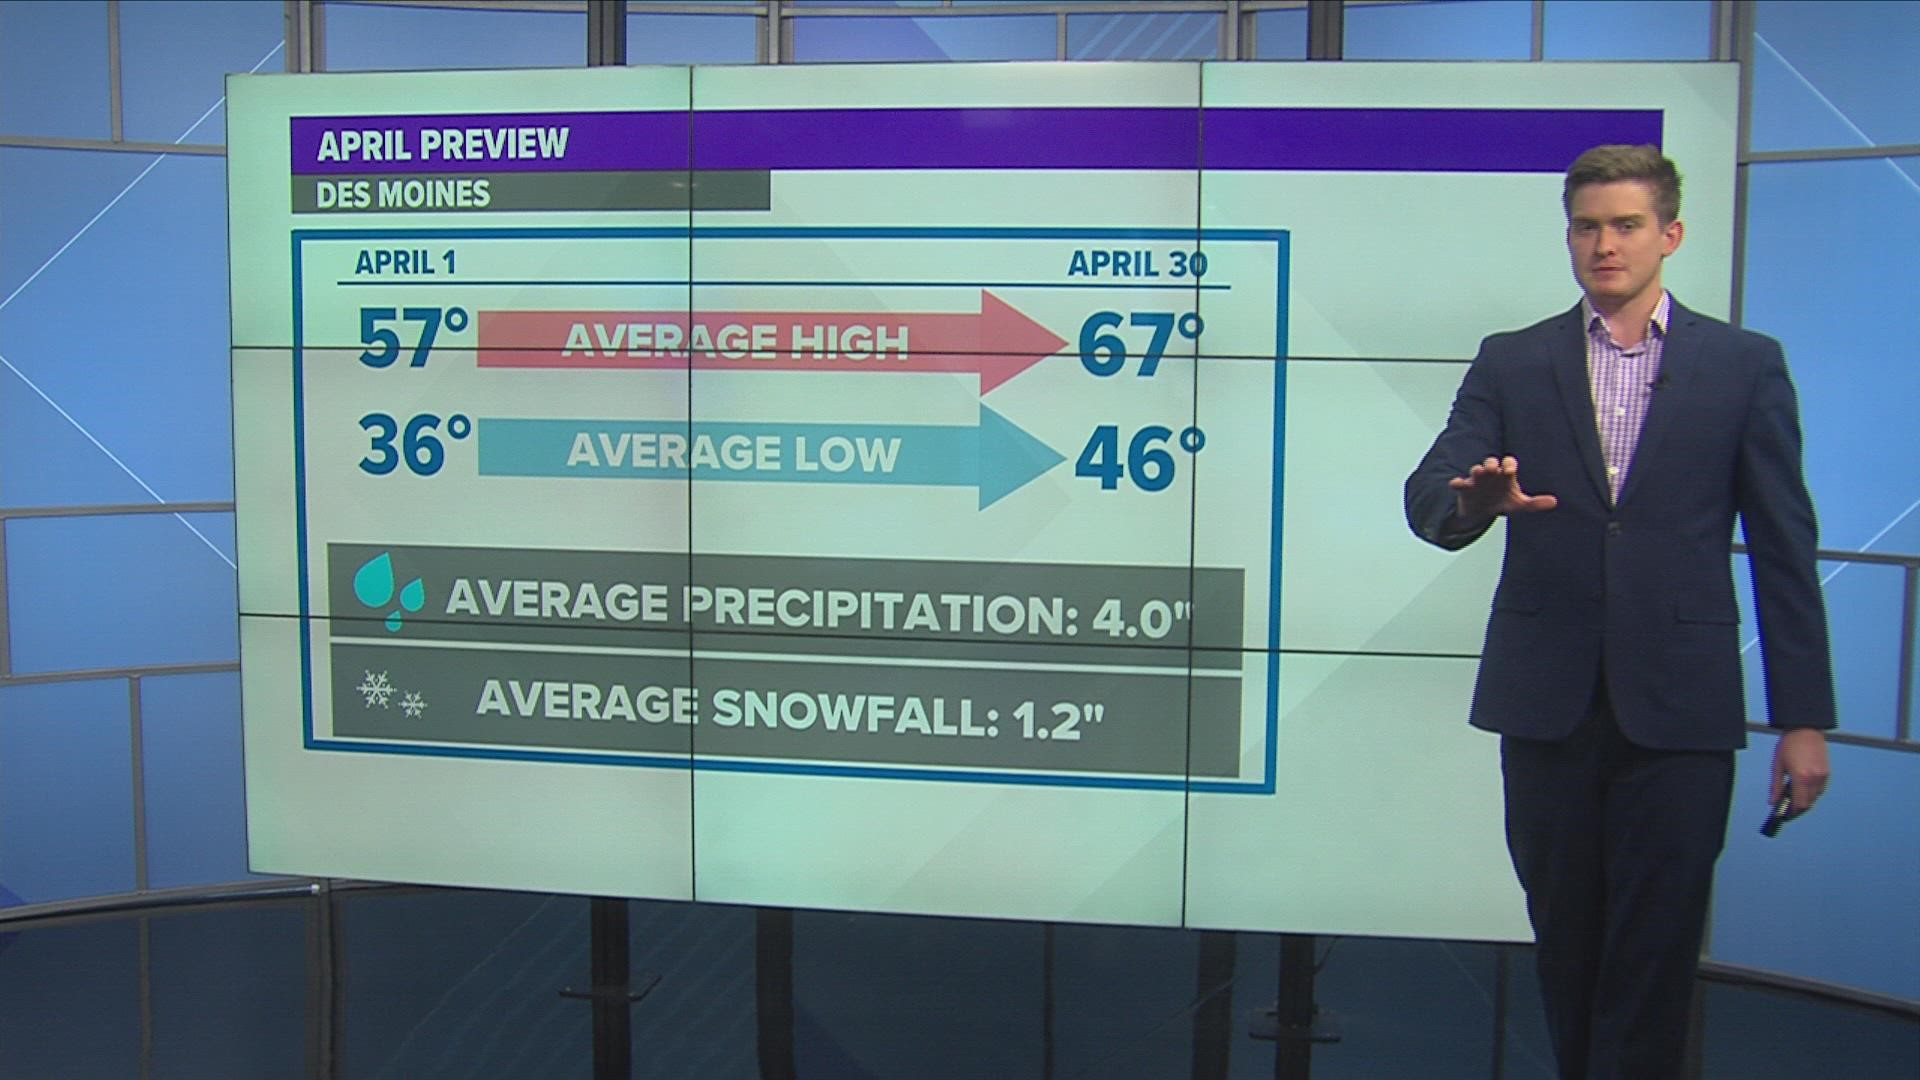 We got almost 3" of snow at the Des Moines airport last night, putting us over the average for monthly snowfall. But what does April look like? Are we done?